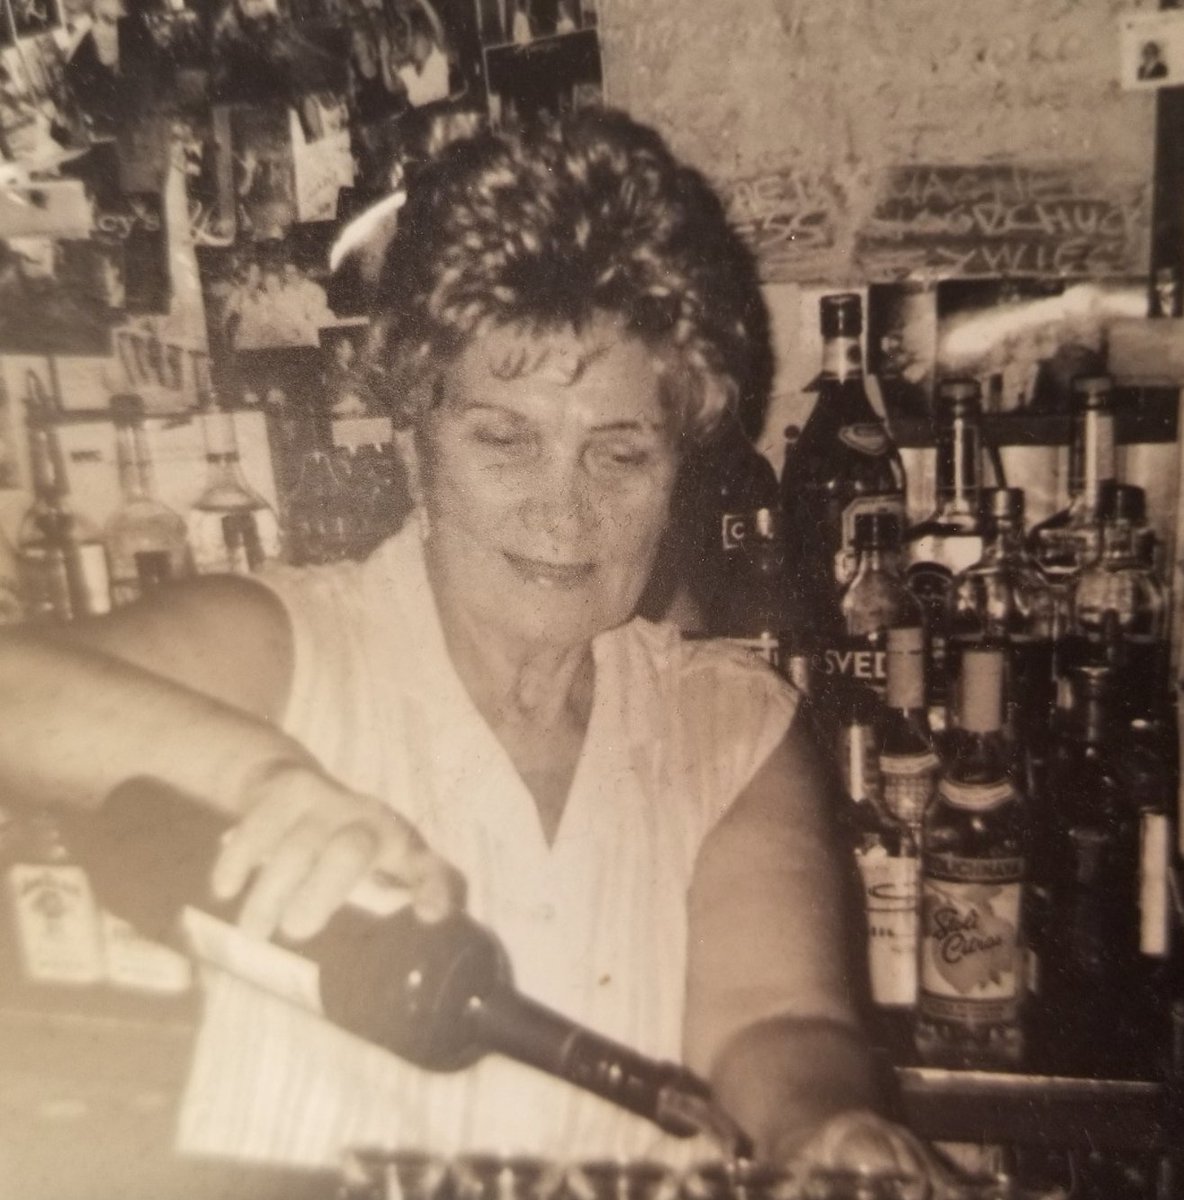 What makes a good dive bar? Being cash only? No Website? Bric-a-brac, and lots of it? Whatever your answer, Lucy's had it. In this edition of 'Sorry, We're Closed,' @ClintonRLanier revisits the recently shuttered East Village legend: fourwallswhiskey.com/blogs/news/new…